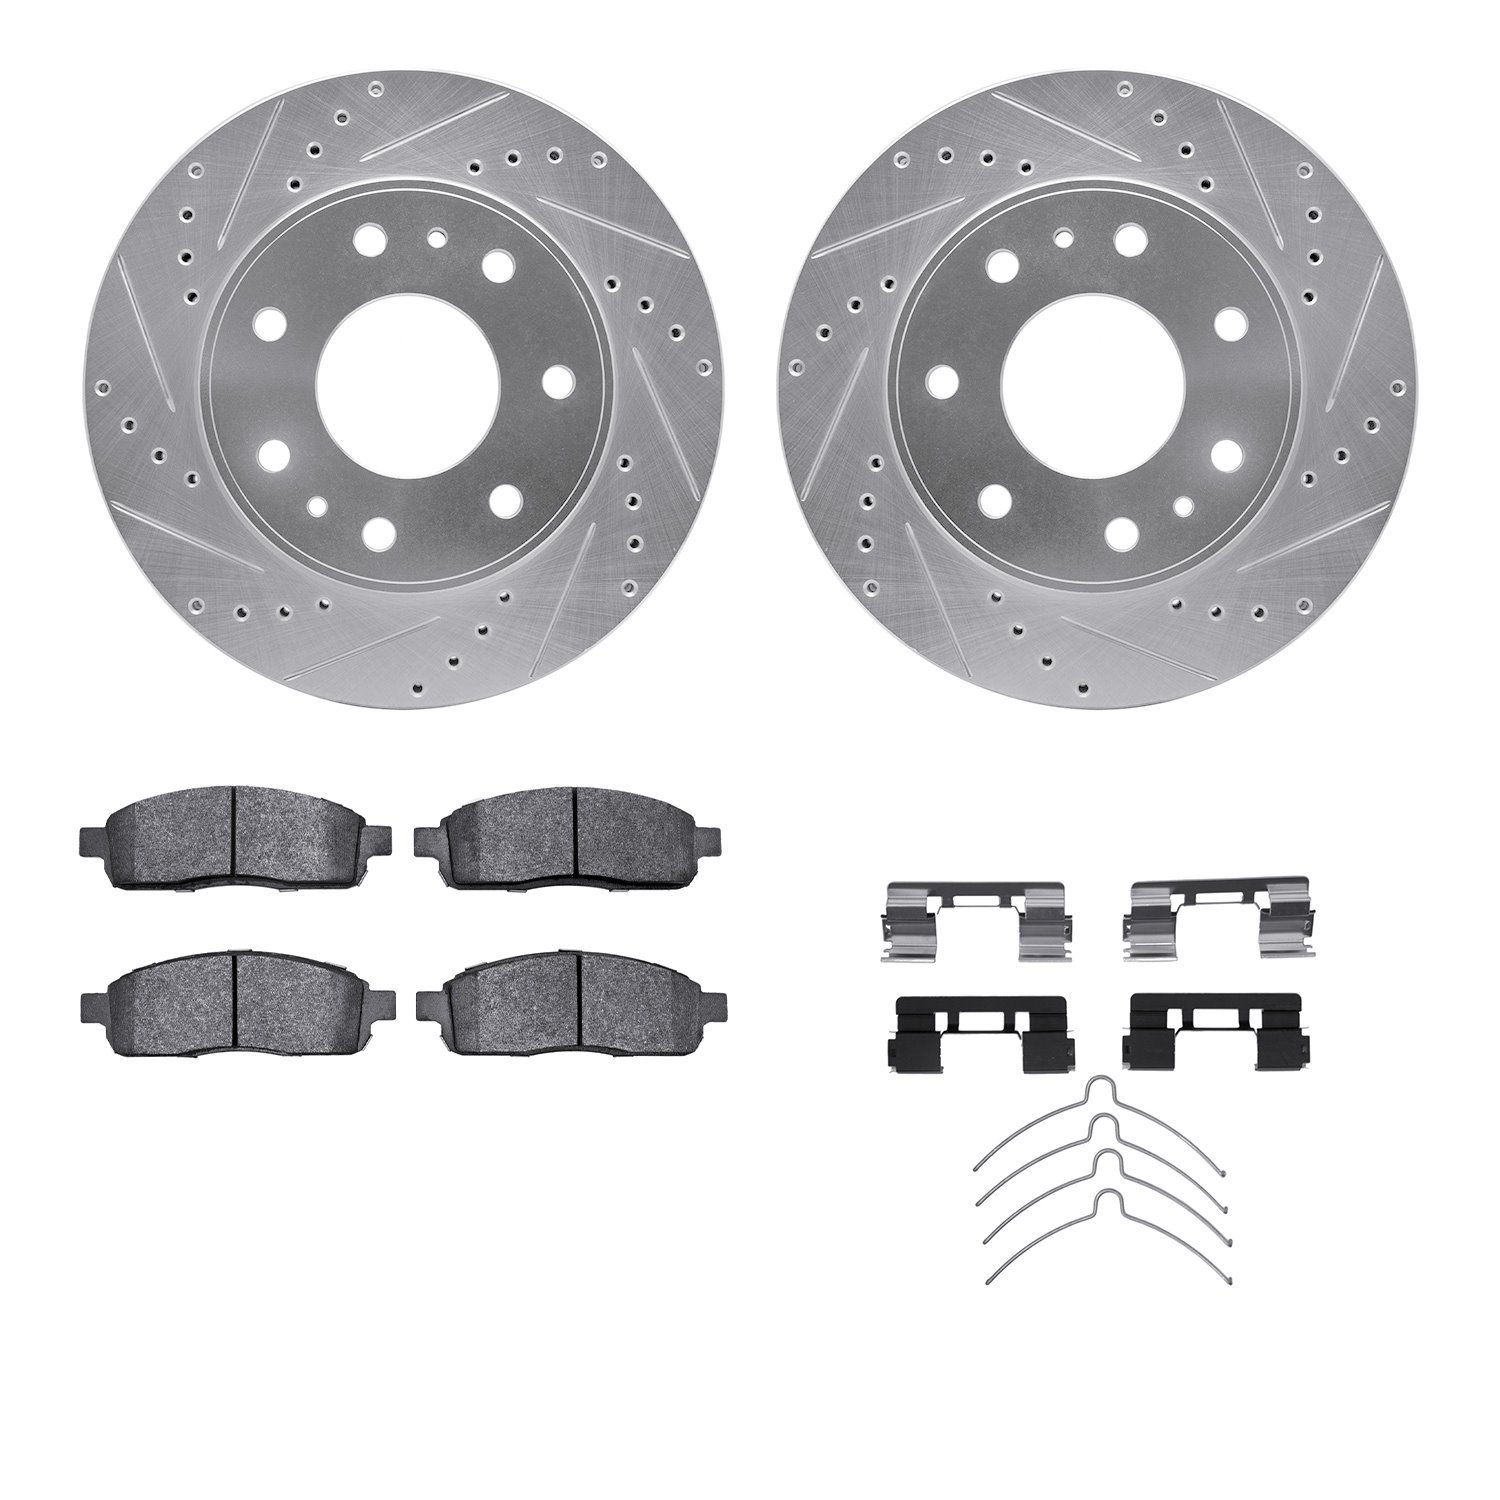 7412-54095 Drilled/Slotted Brake Rotors with Ultimate-Duty Brake Pads Kit & Hardware [Silver], 2009-2009 Ford/Lincoln/Mercury/Ma